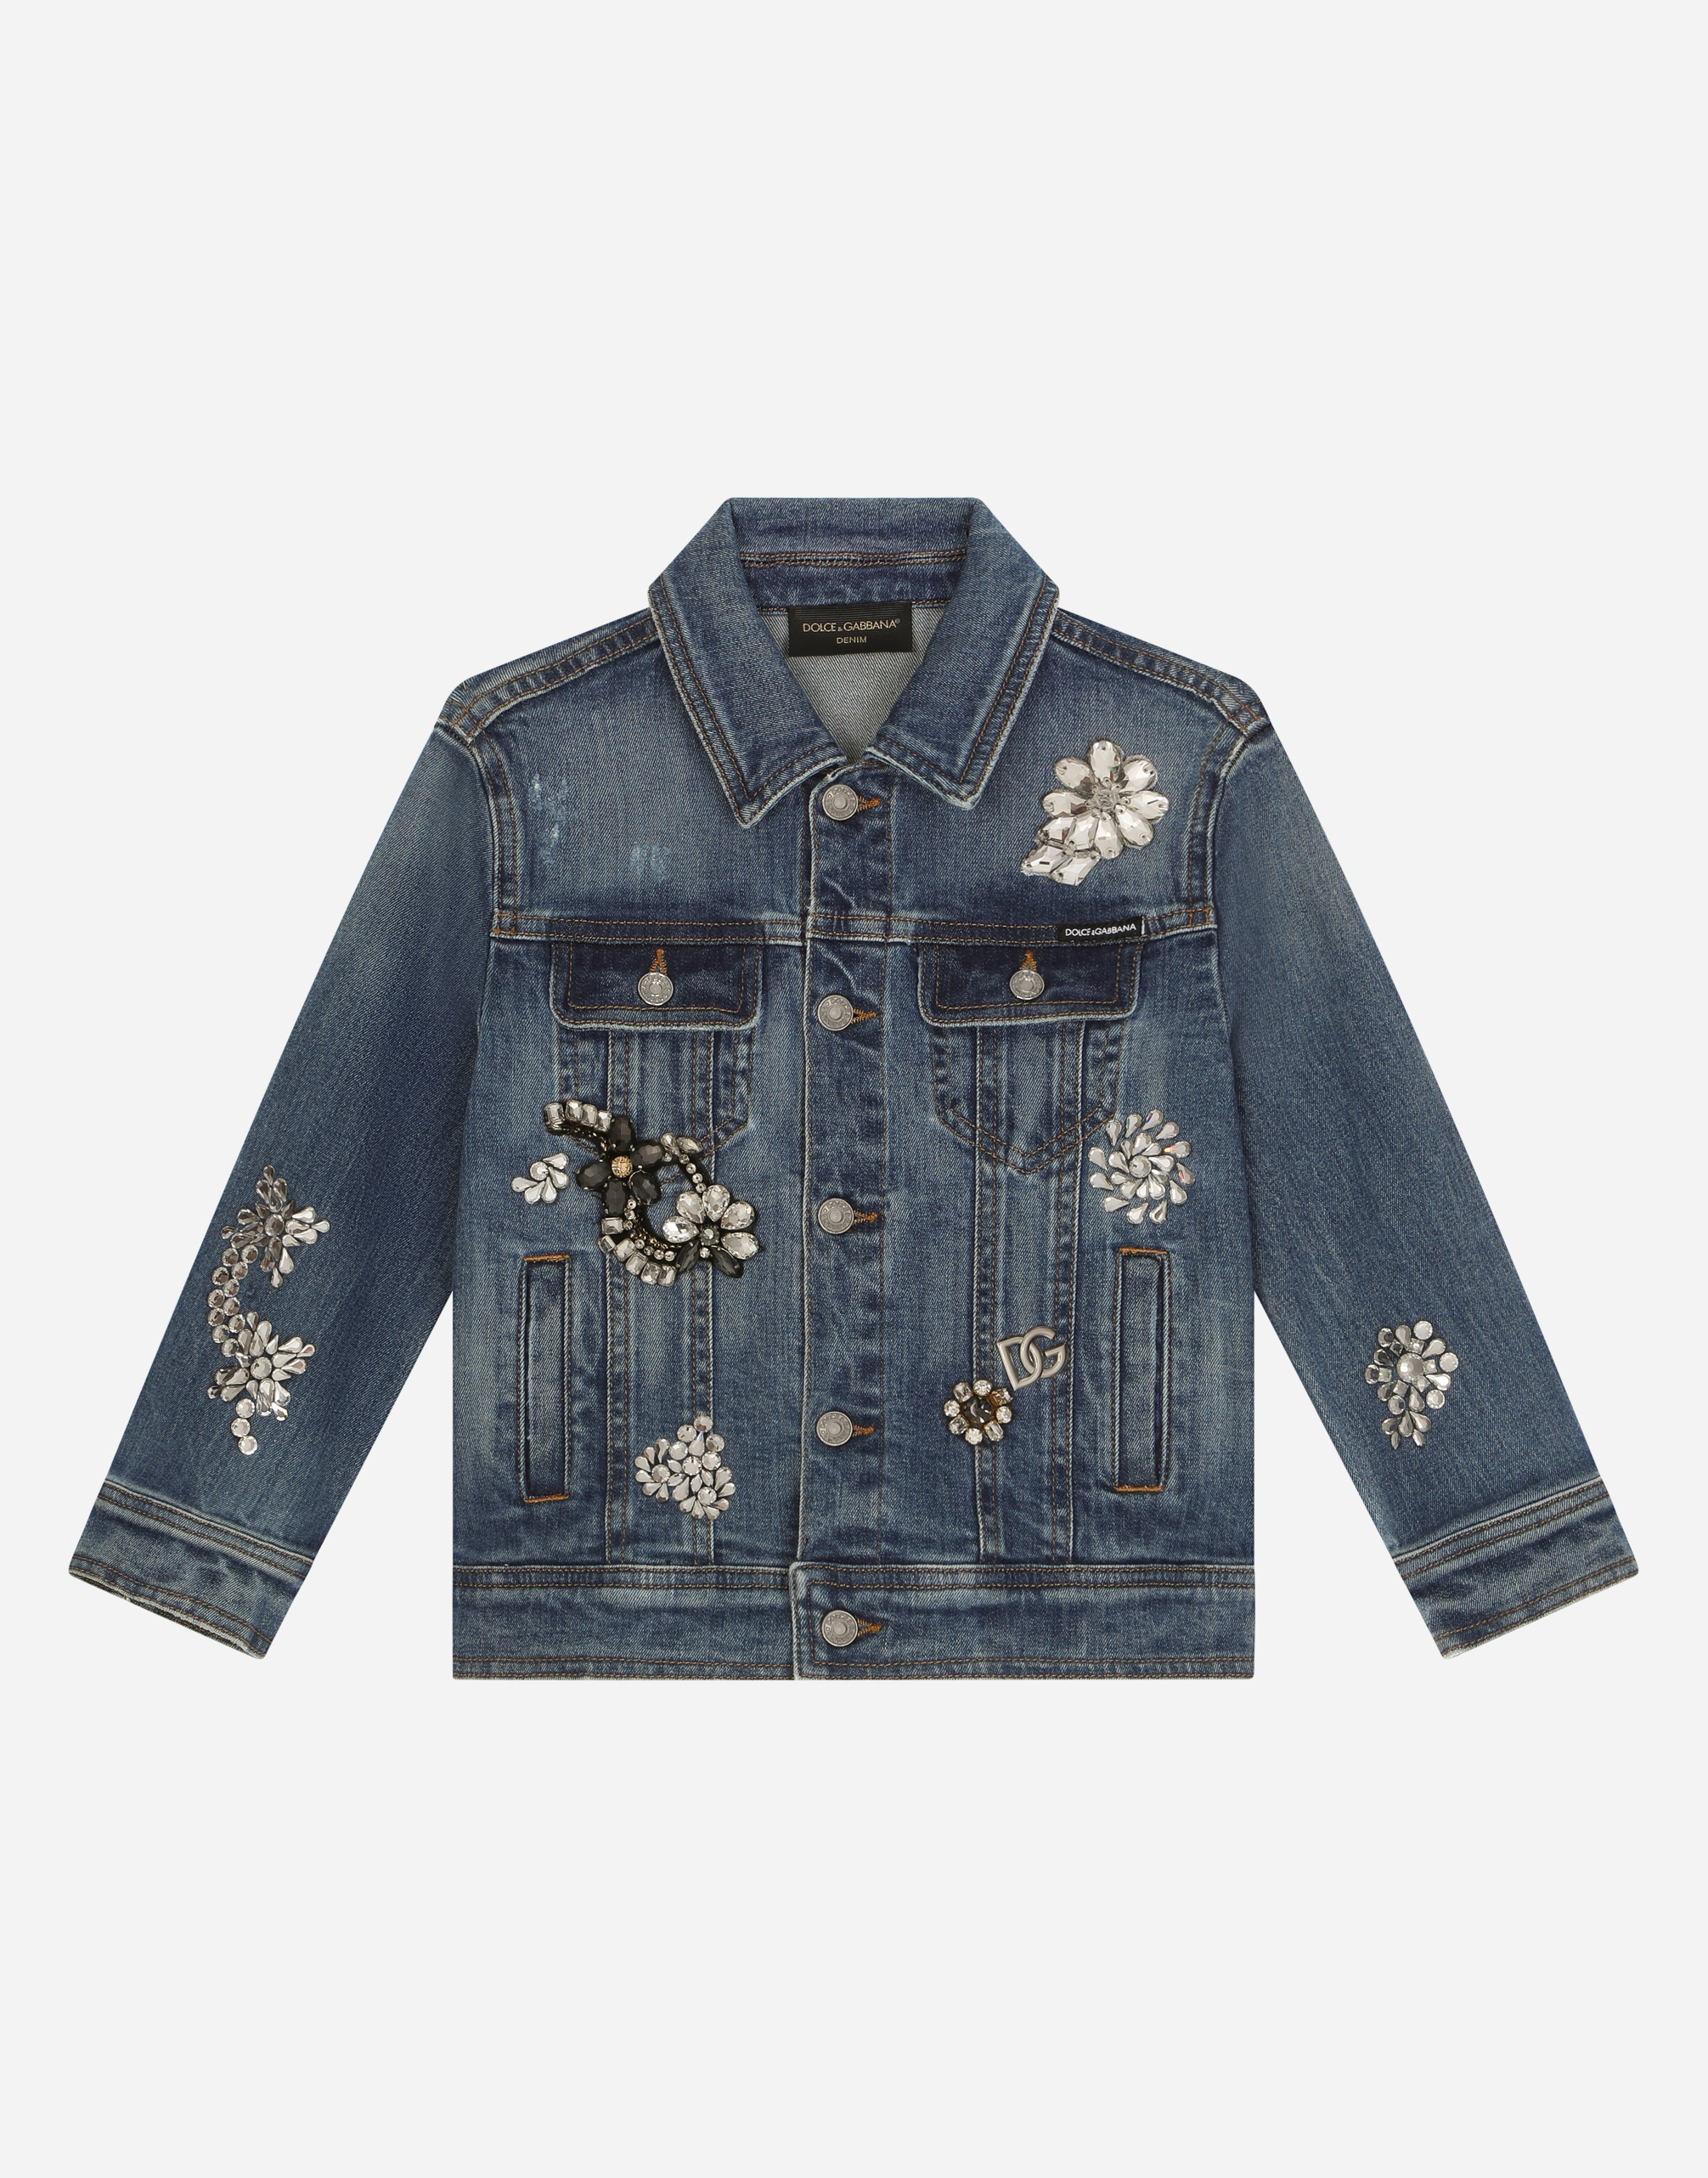 Dolce & Gabbana Kids' Stretch Denim Jacket With Rhinestones And Embroidery In Multicolor